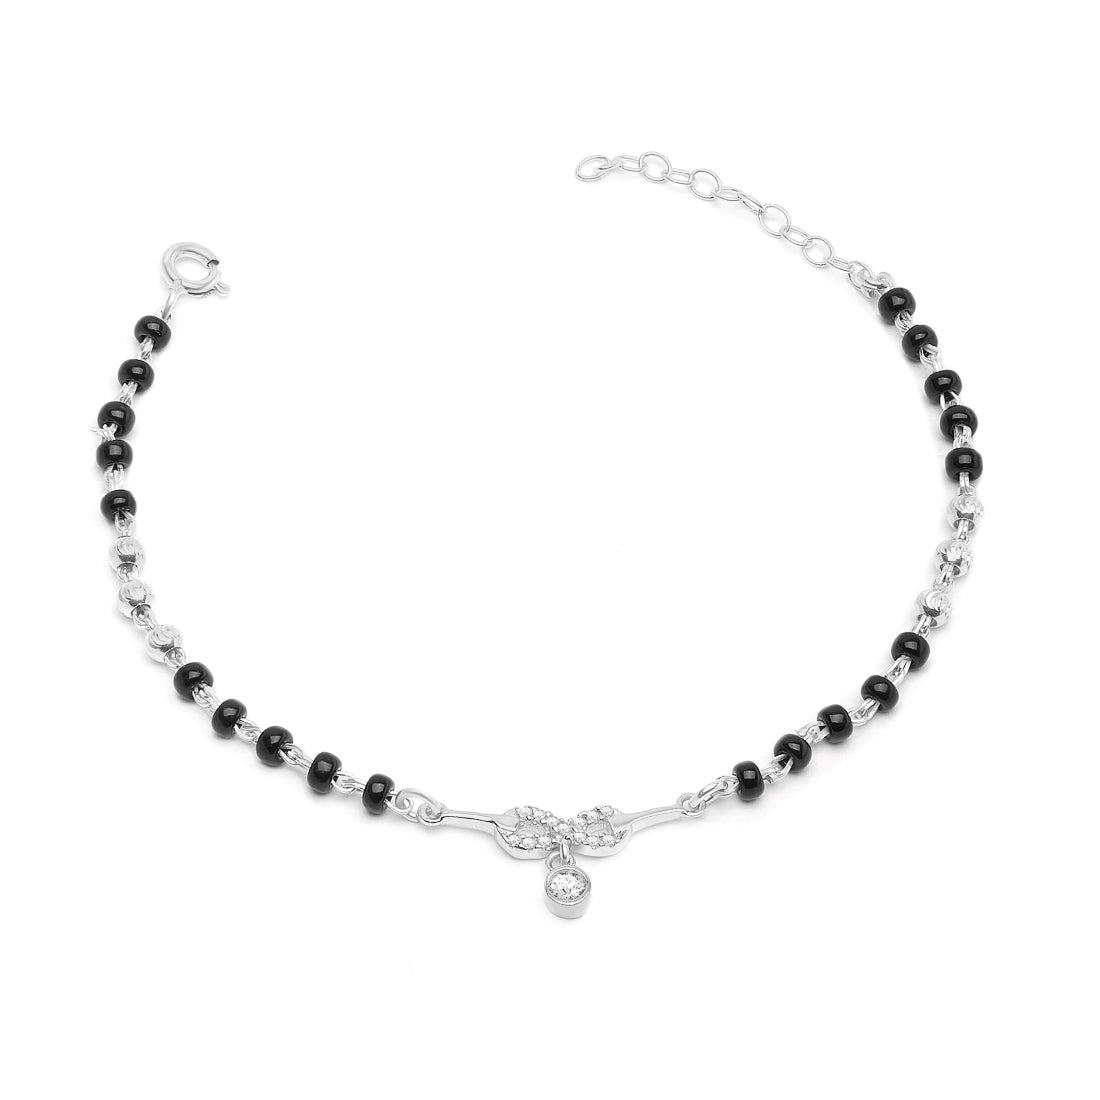 Infinity with Solitaire Drop 925 Silver Mangalsutra Bracelet